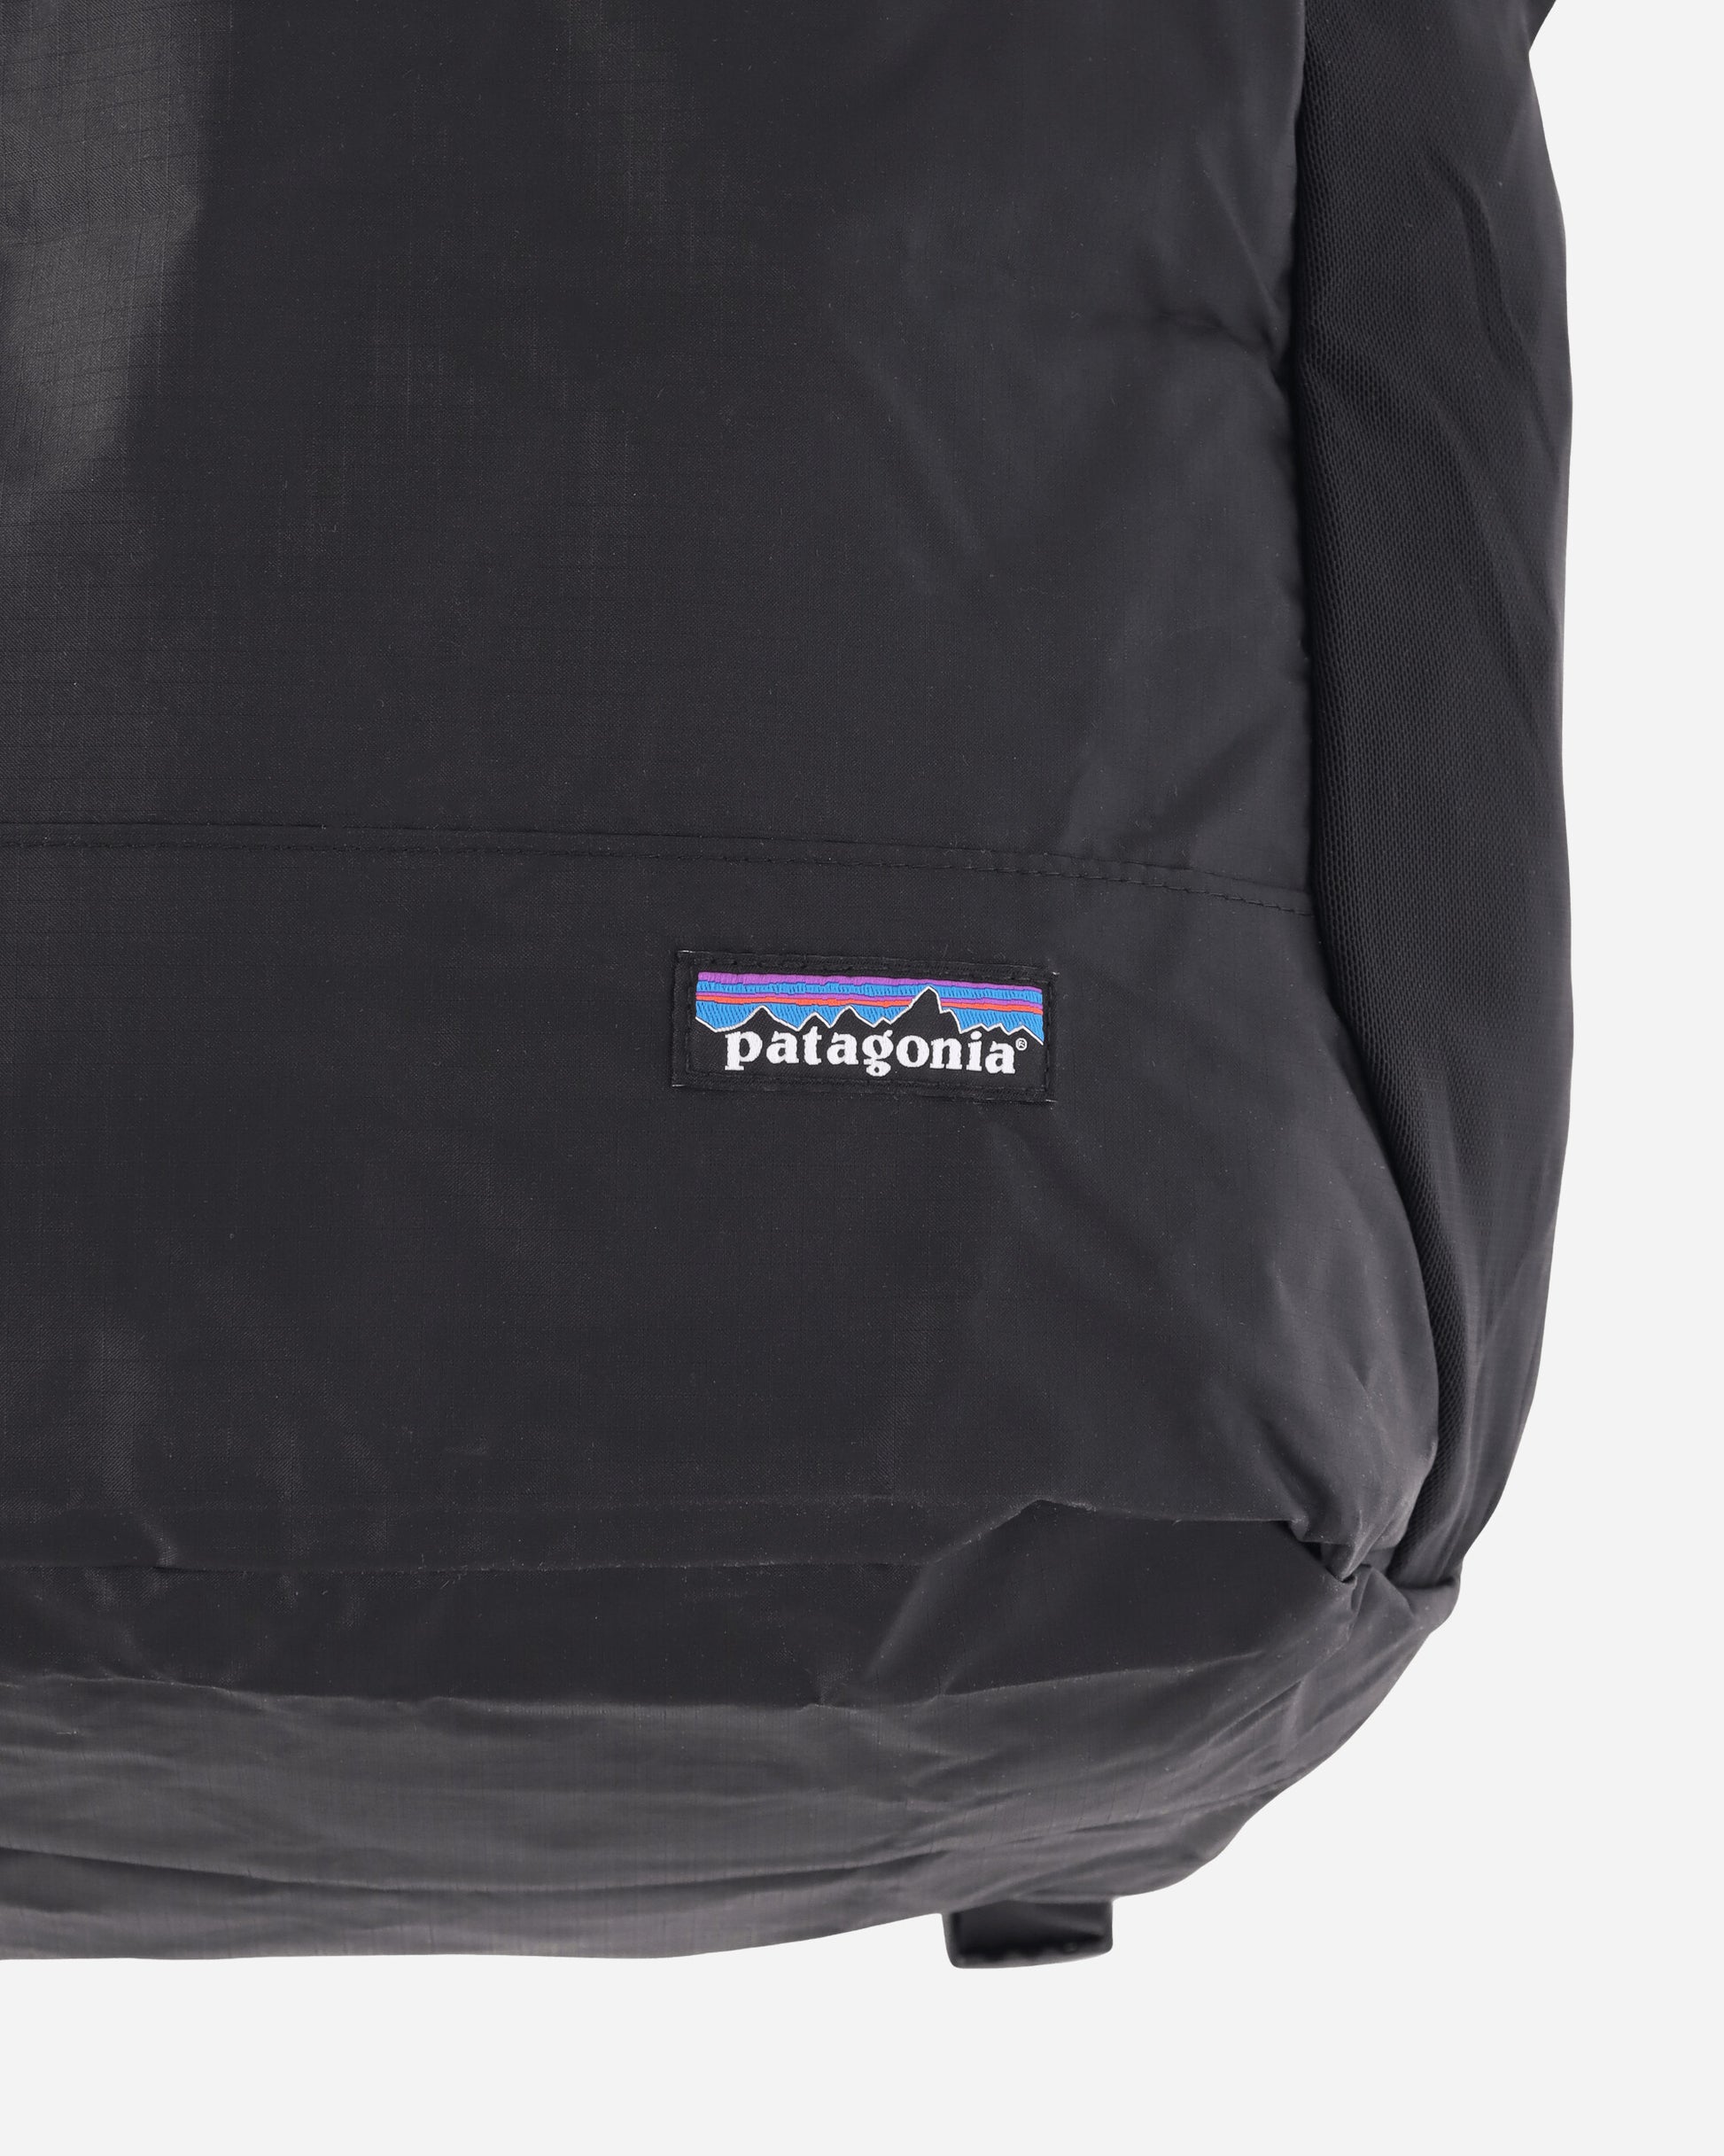 Patagonia Ultralight Black Hole Tote Pack Black Bags and Backpacks Tote Bags 48809 BLK